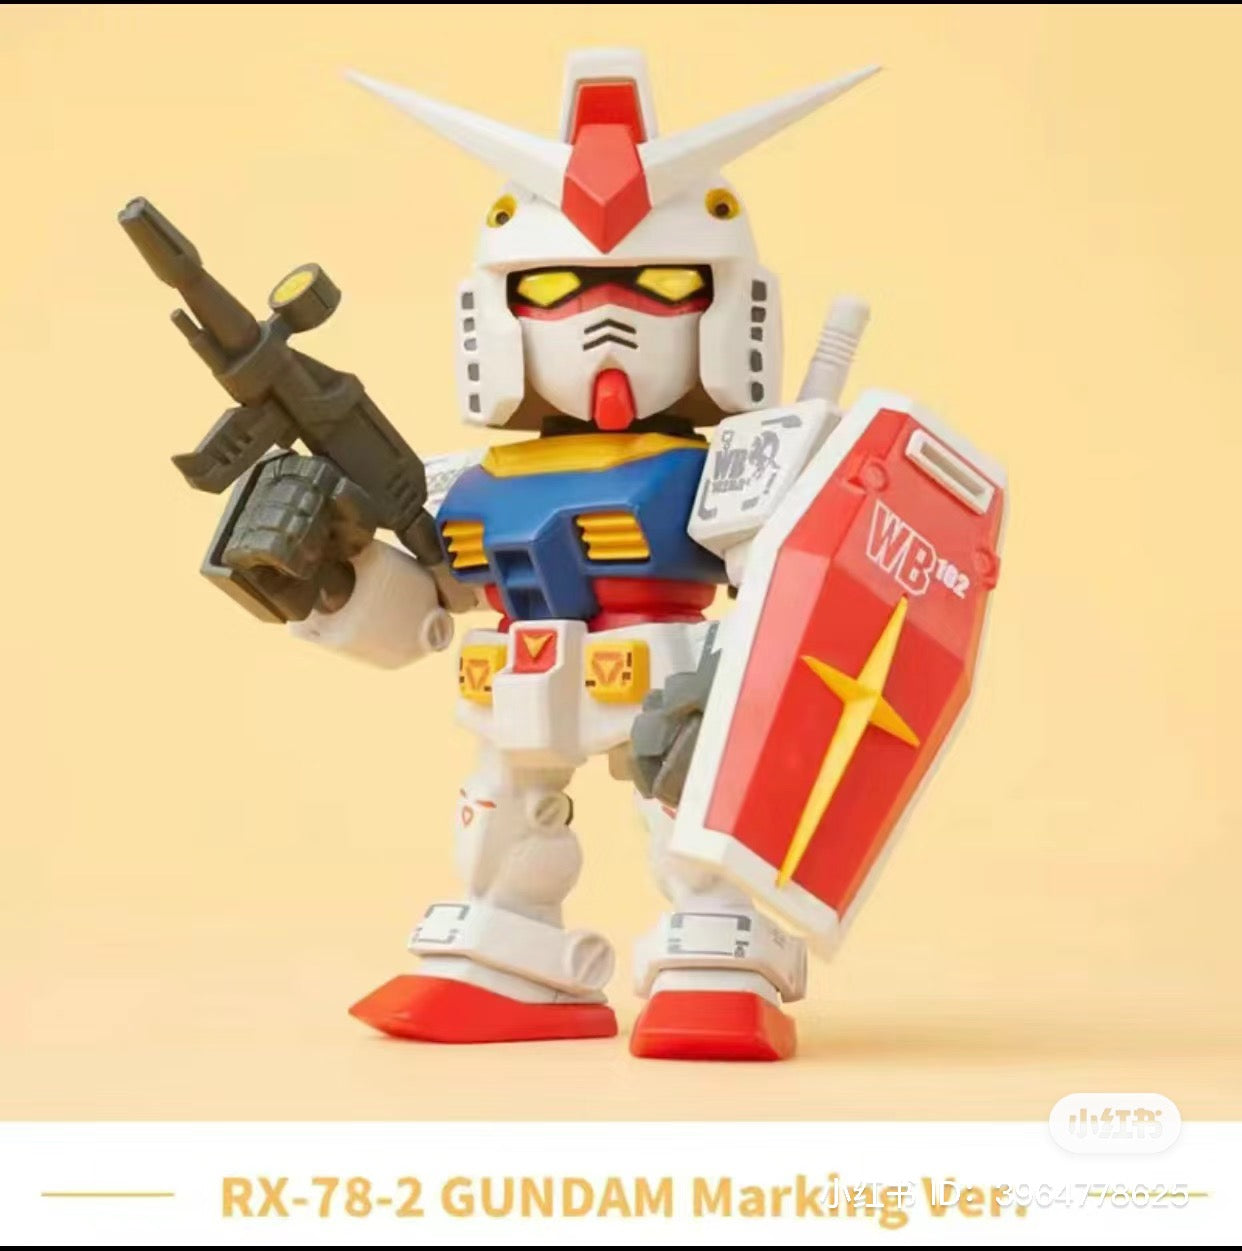 A blind box series featuring QMSV-MINI GUNDAM 2.0. Toy robot holding a gun, close-ups of toy details. Preorder now, ships late June 2024.